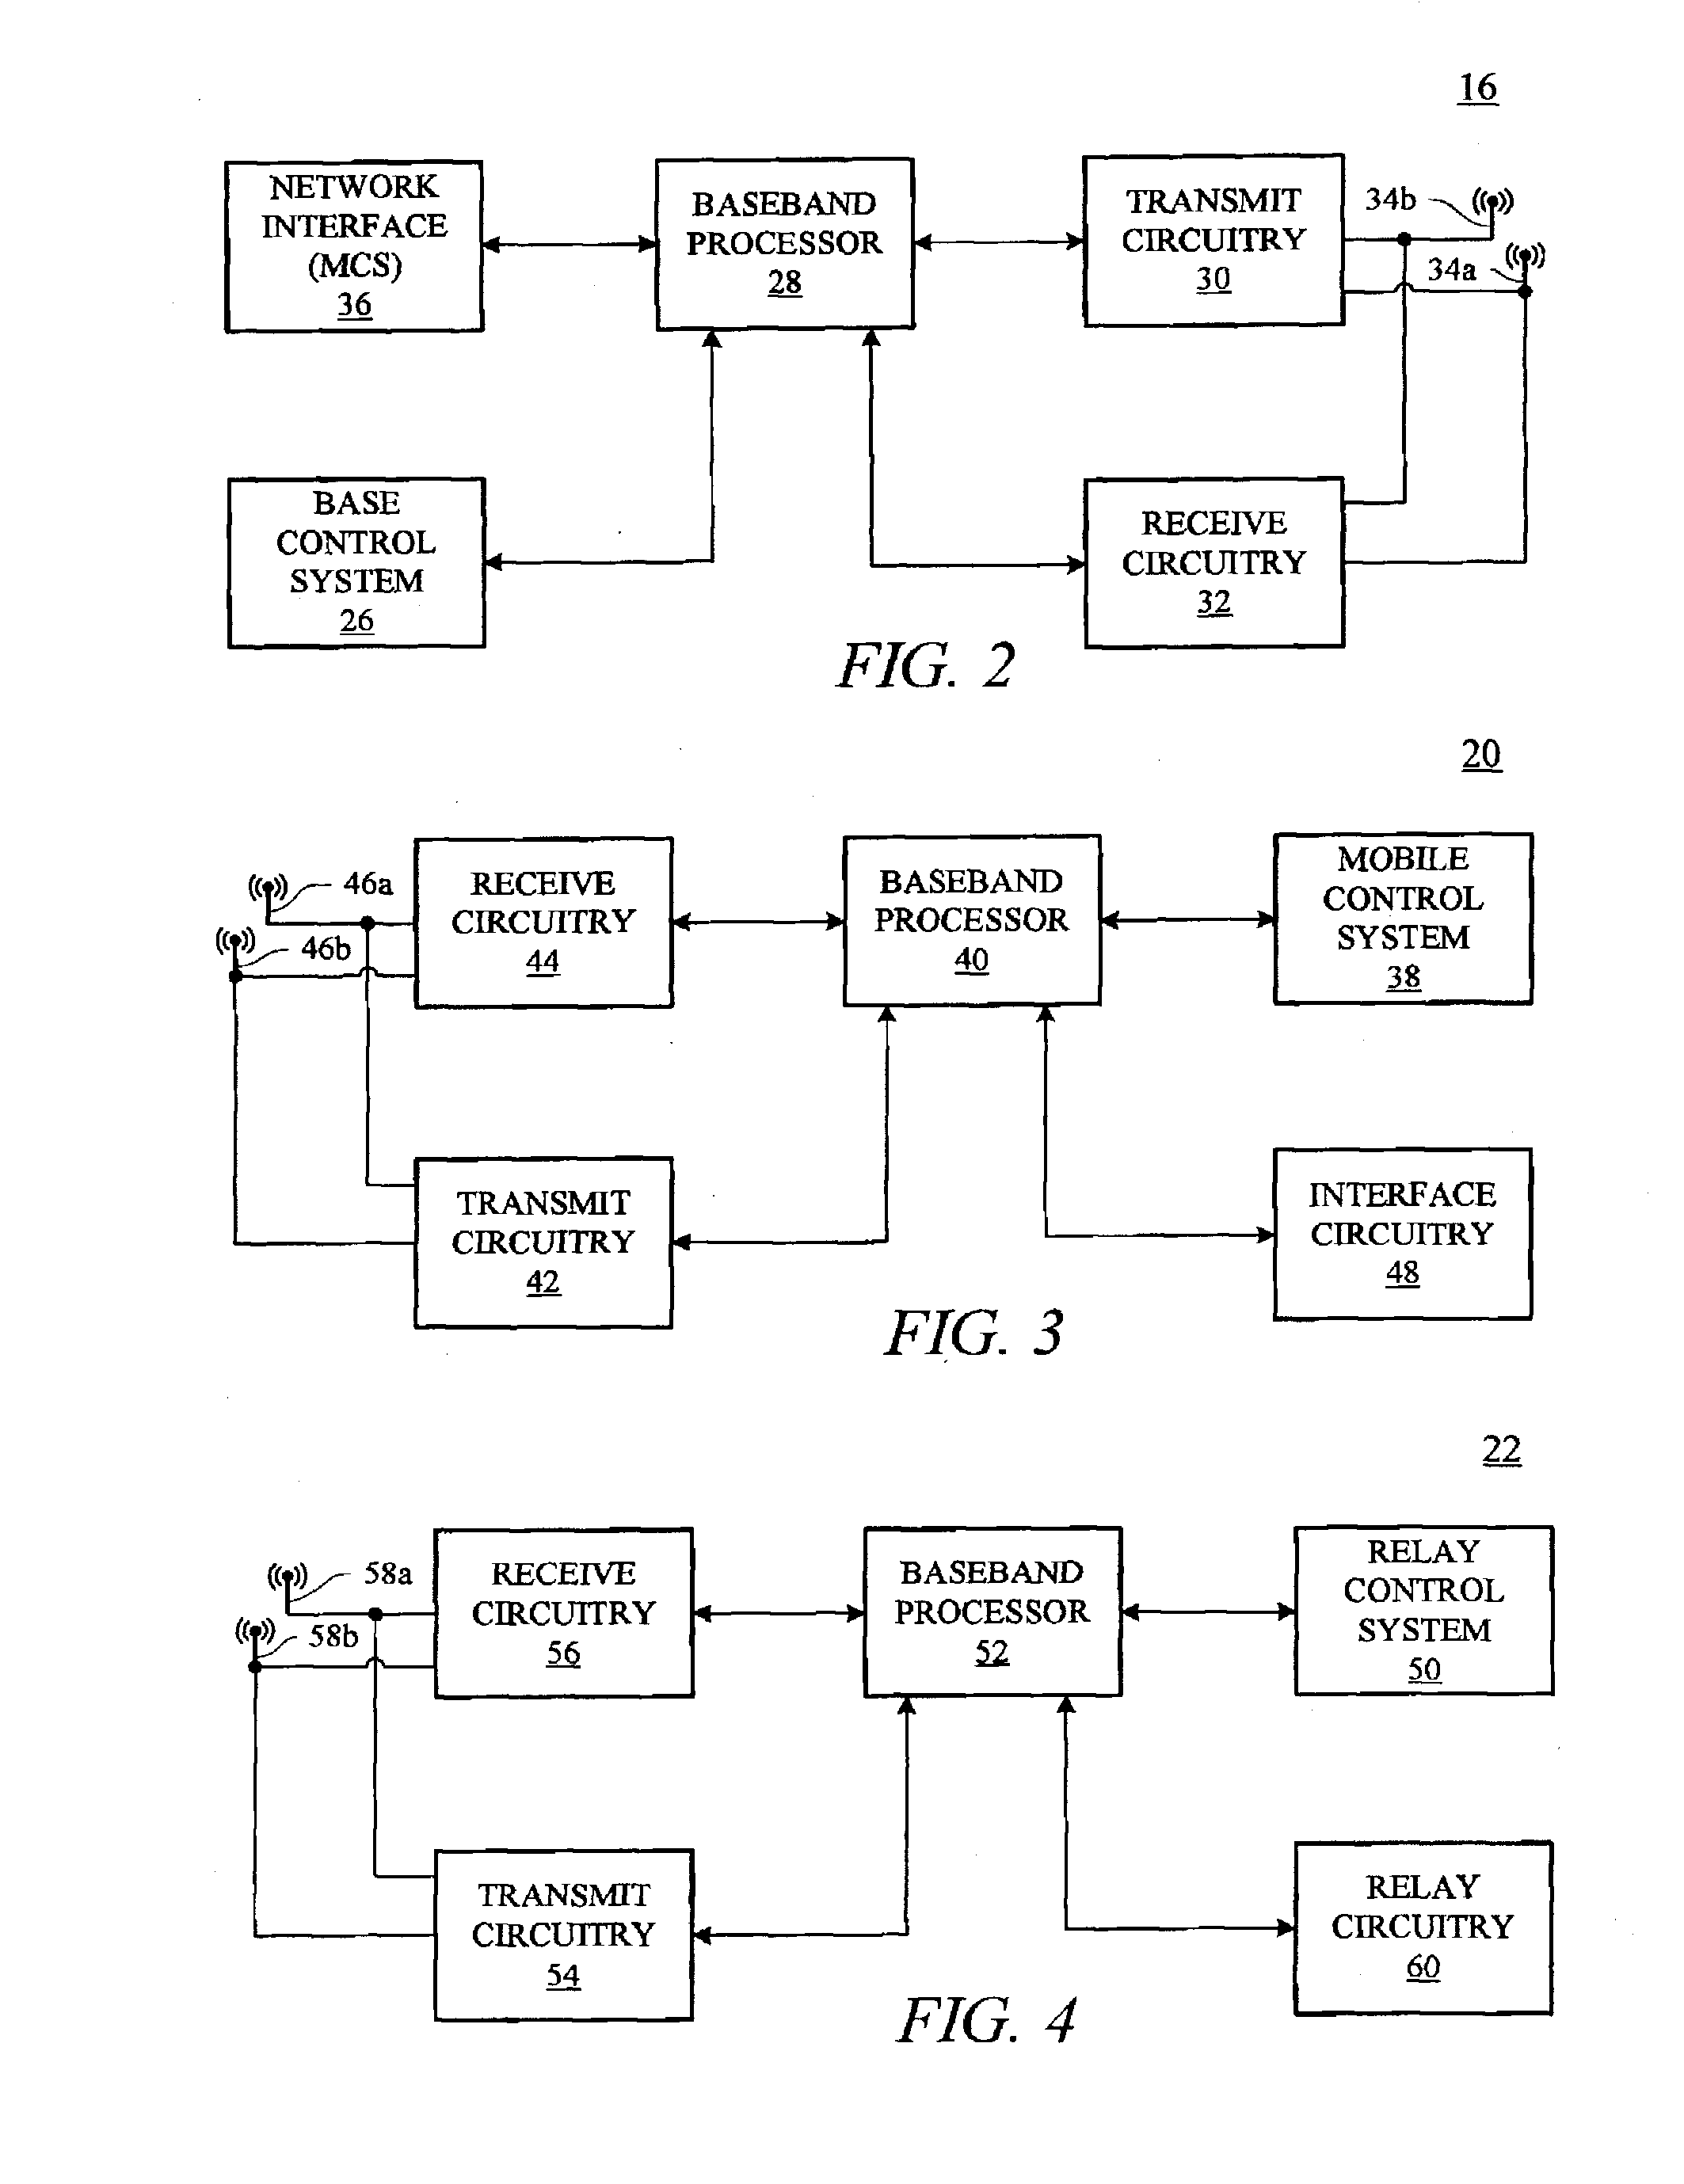 Method and system for providing an uplink structure and minimizing pilot signal overhead in a wireless communication network